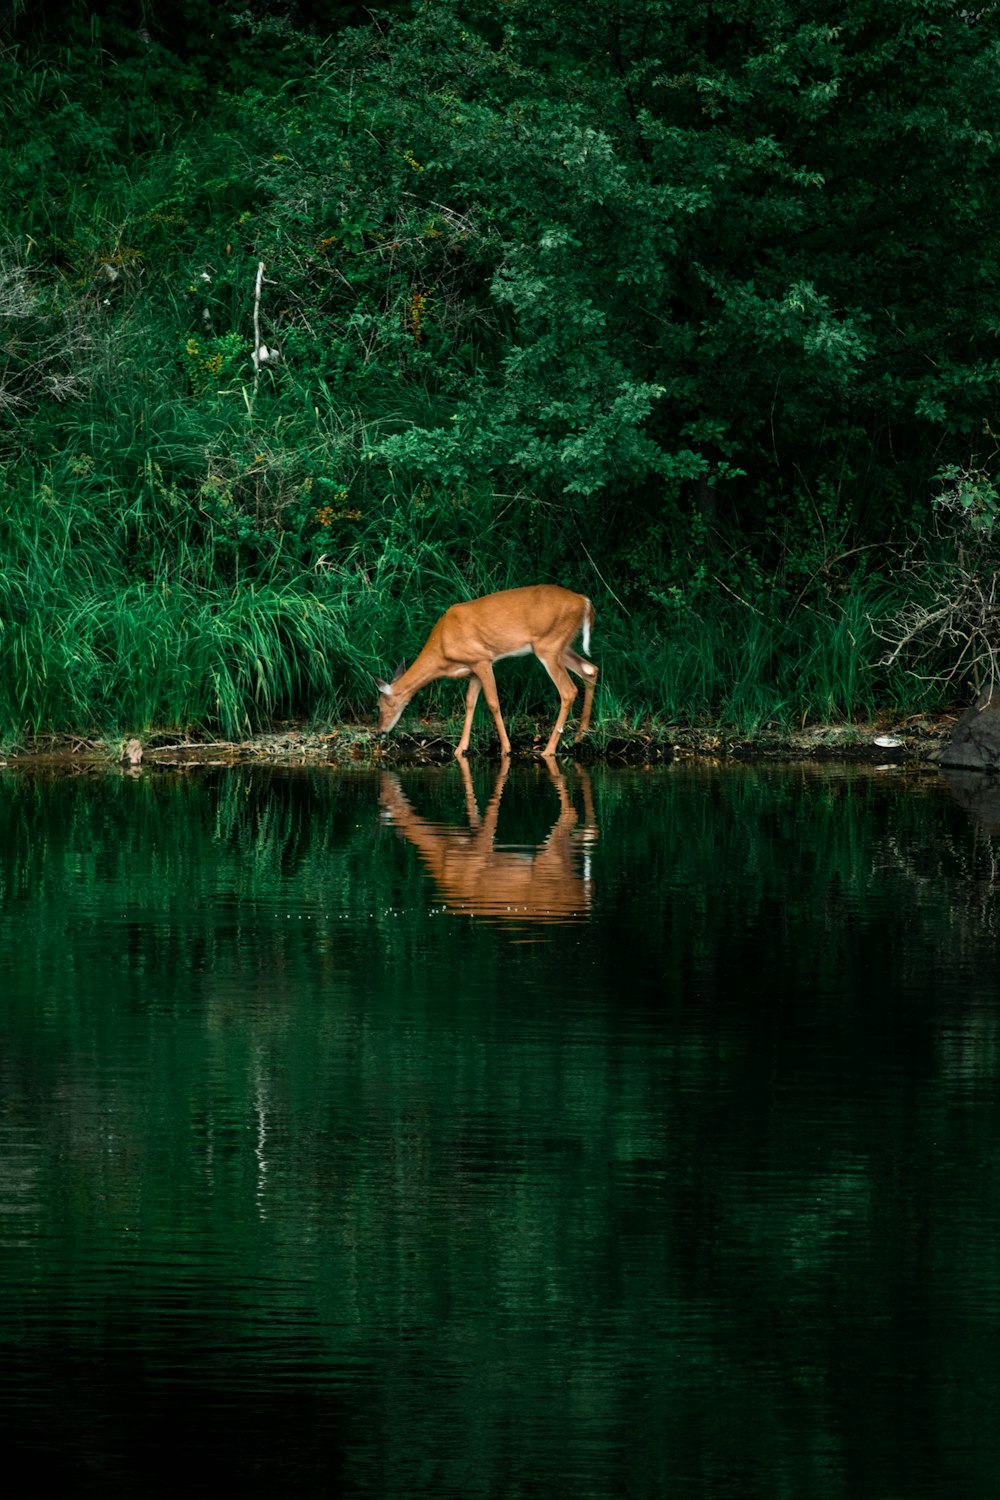 a deer drinking water from a lake surrounded by trees